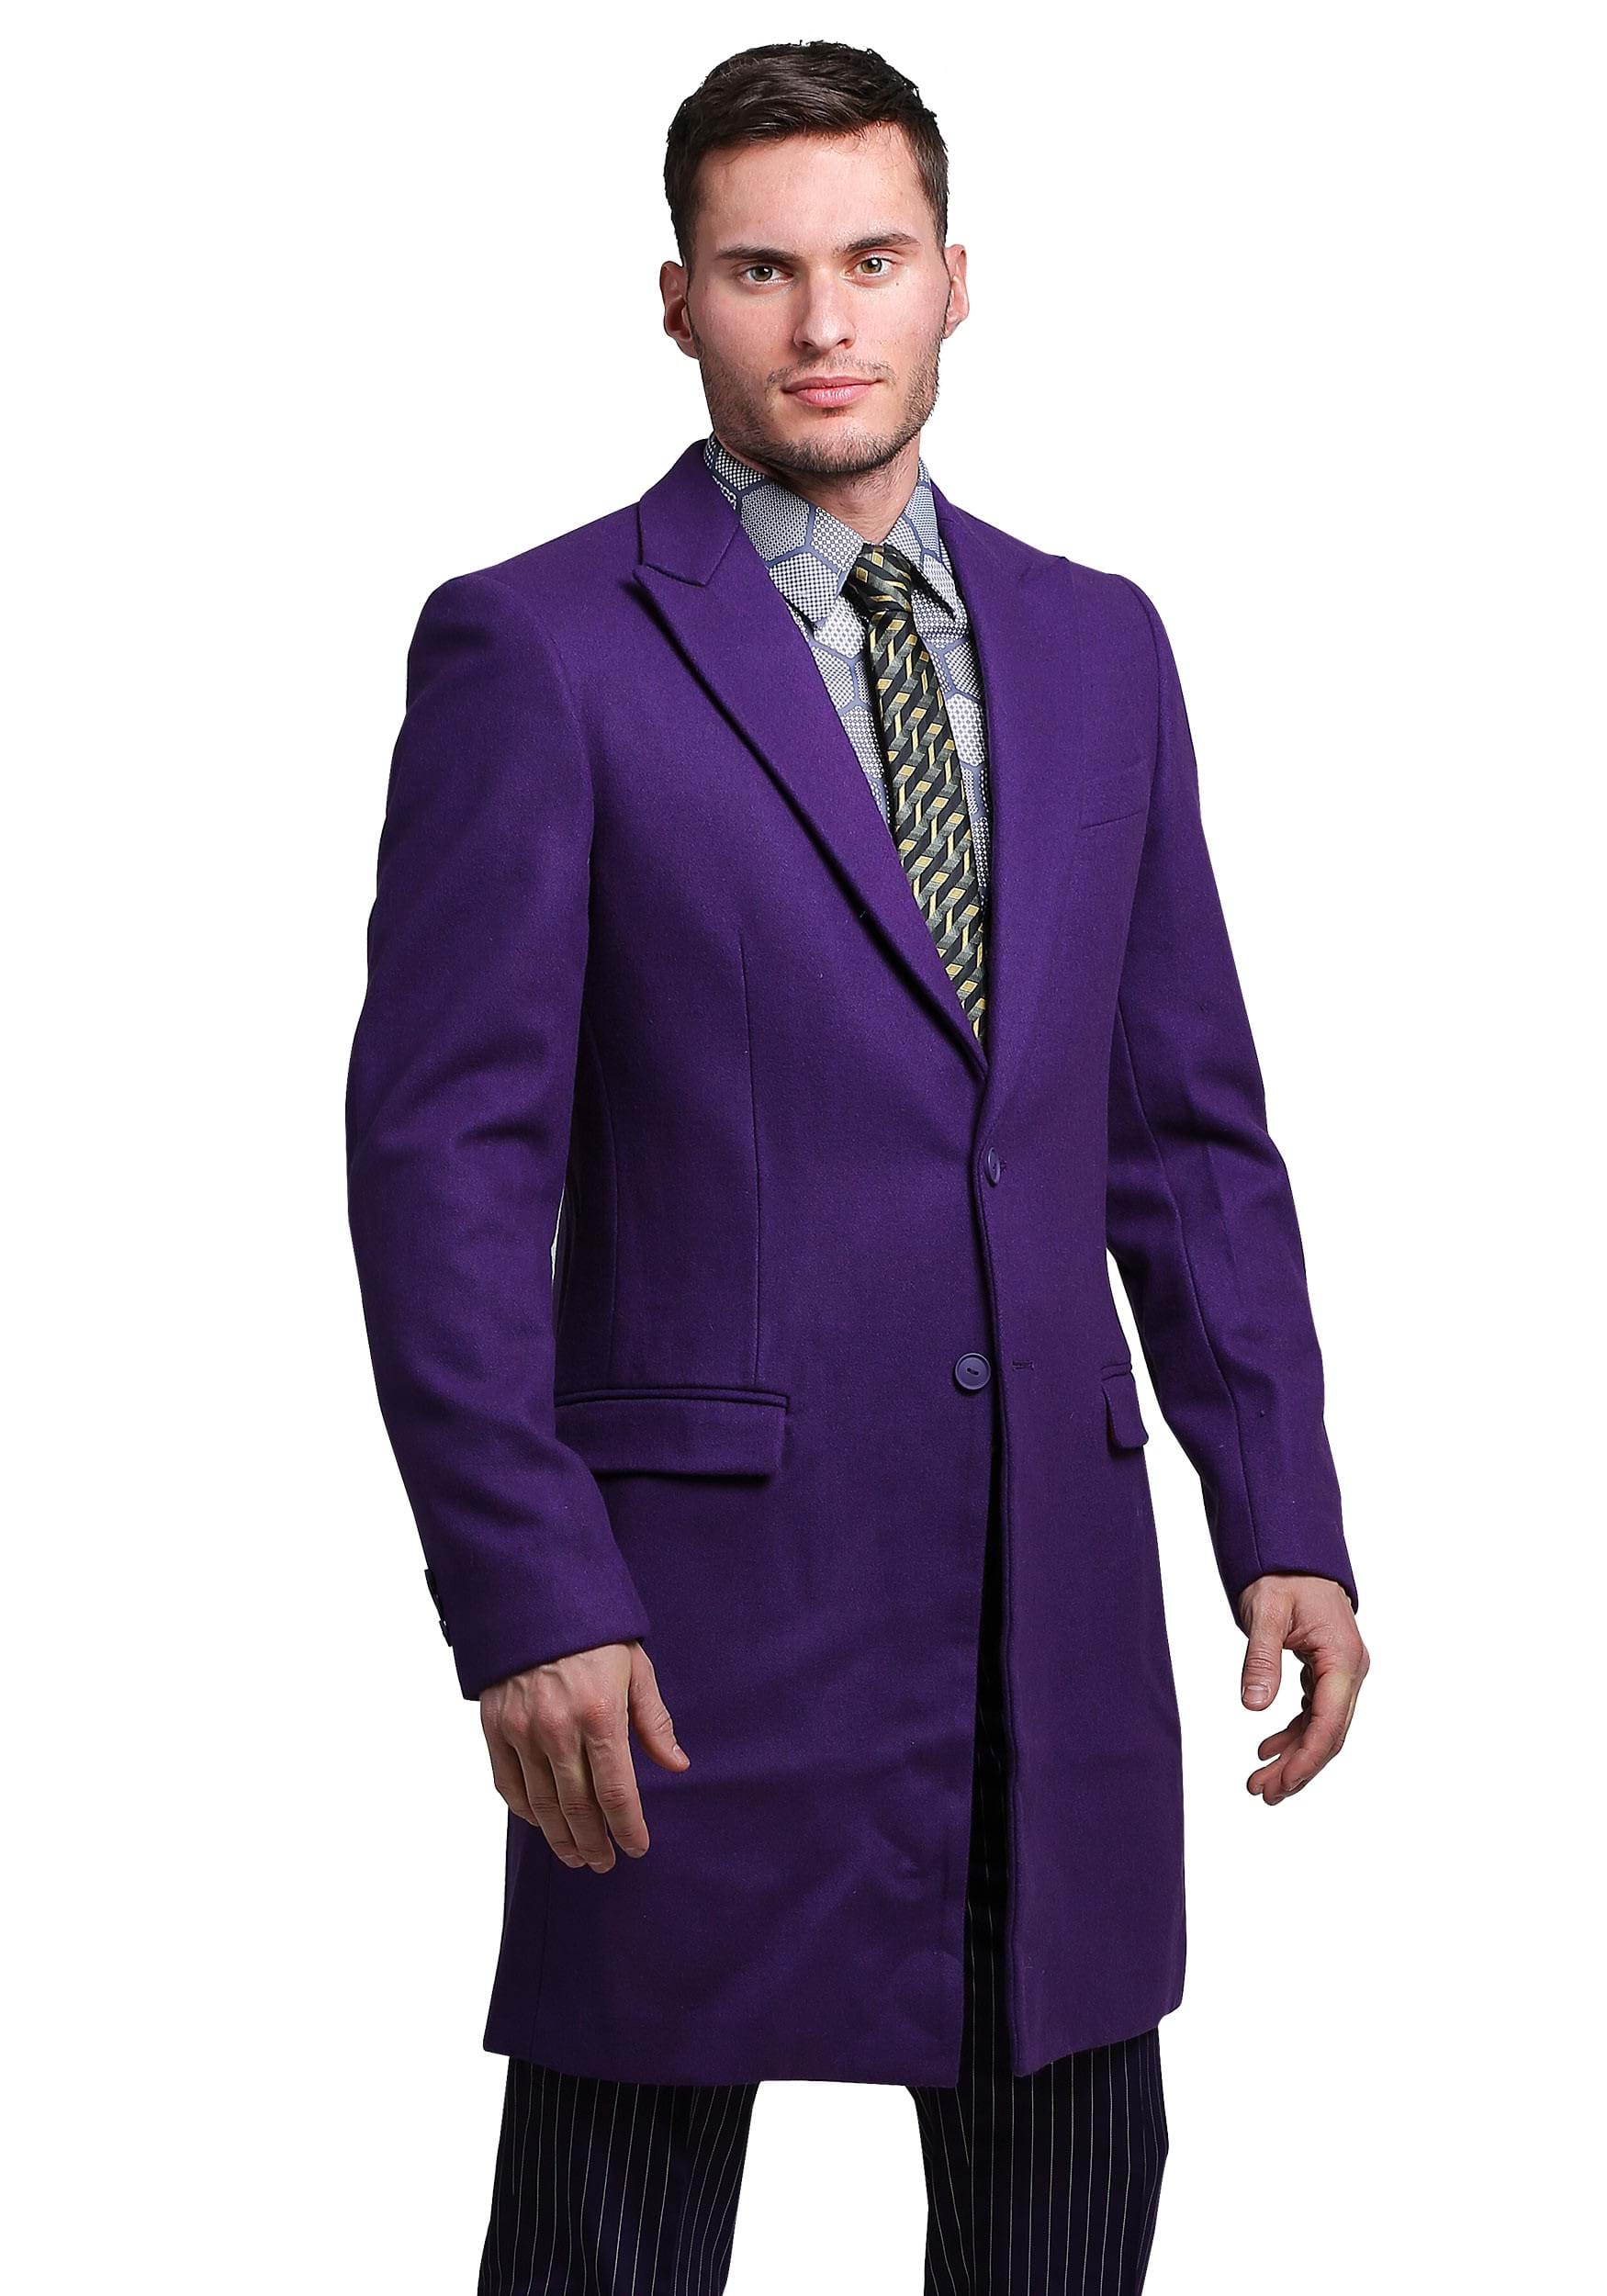 Image of THE JOKER Slim Fit Suit Overcoat (Authentic) ID FUN9011O-38